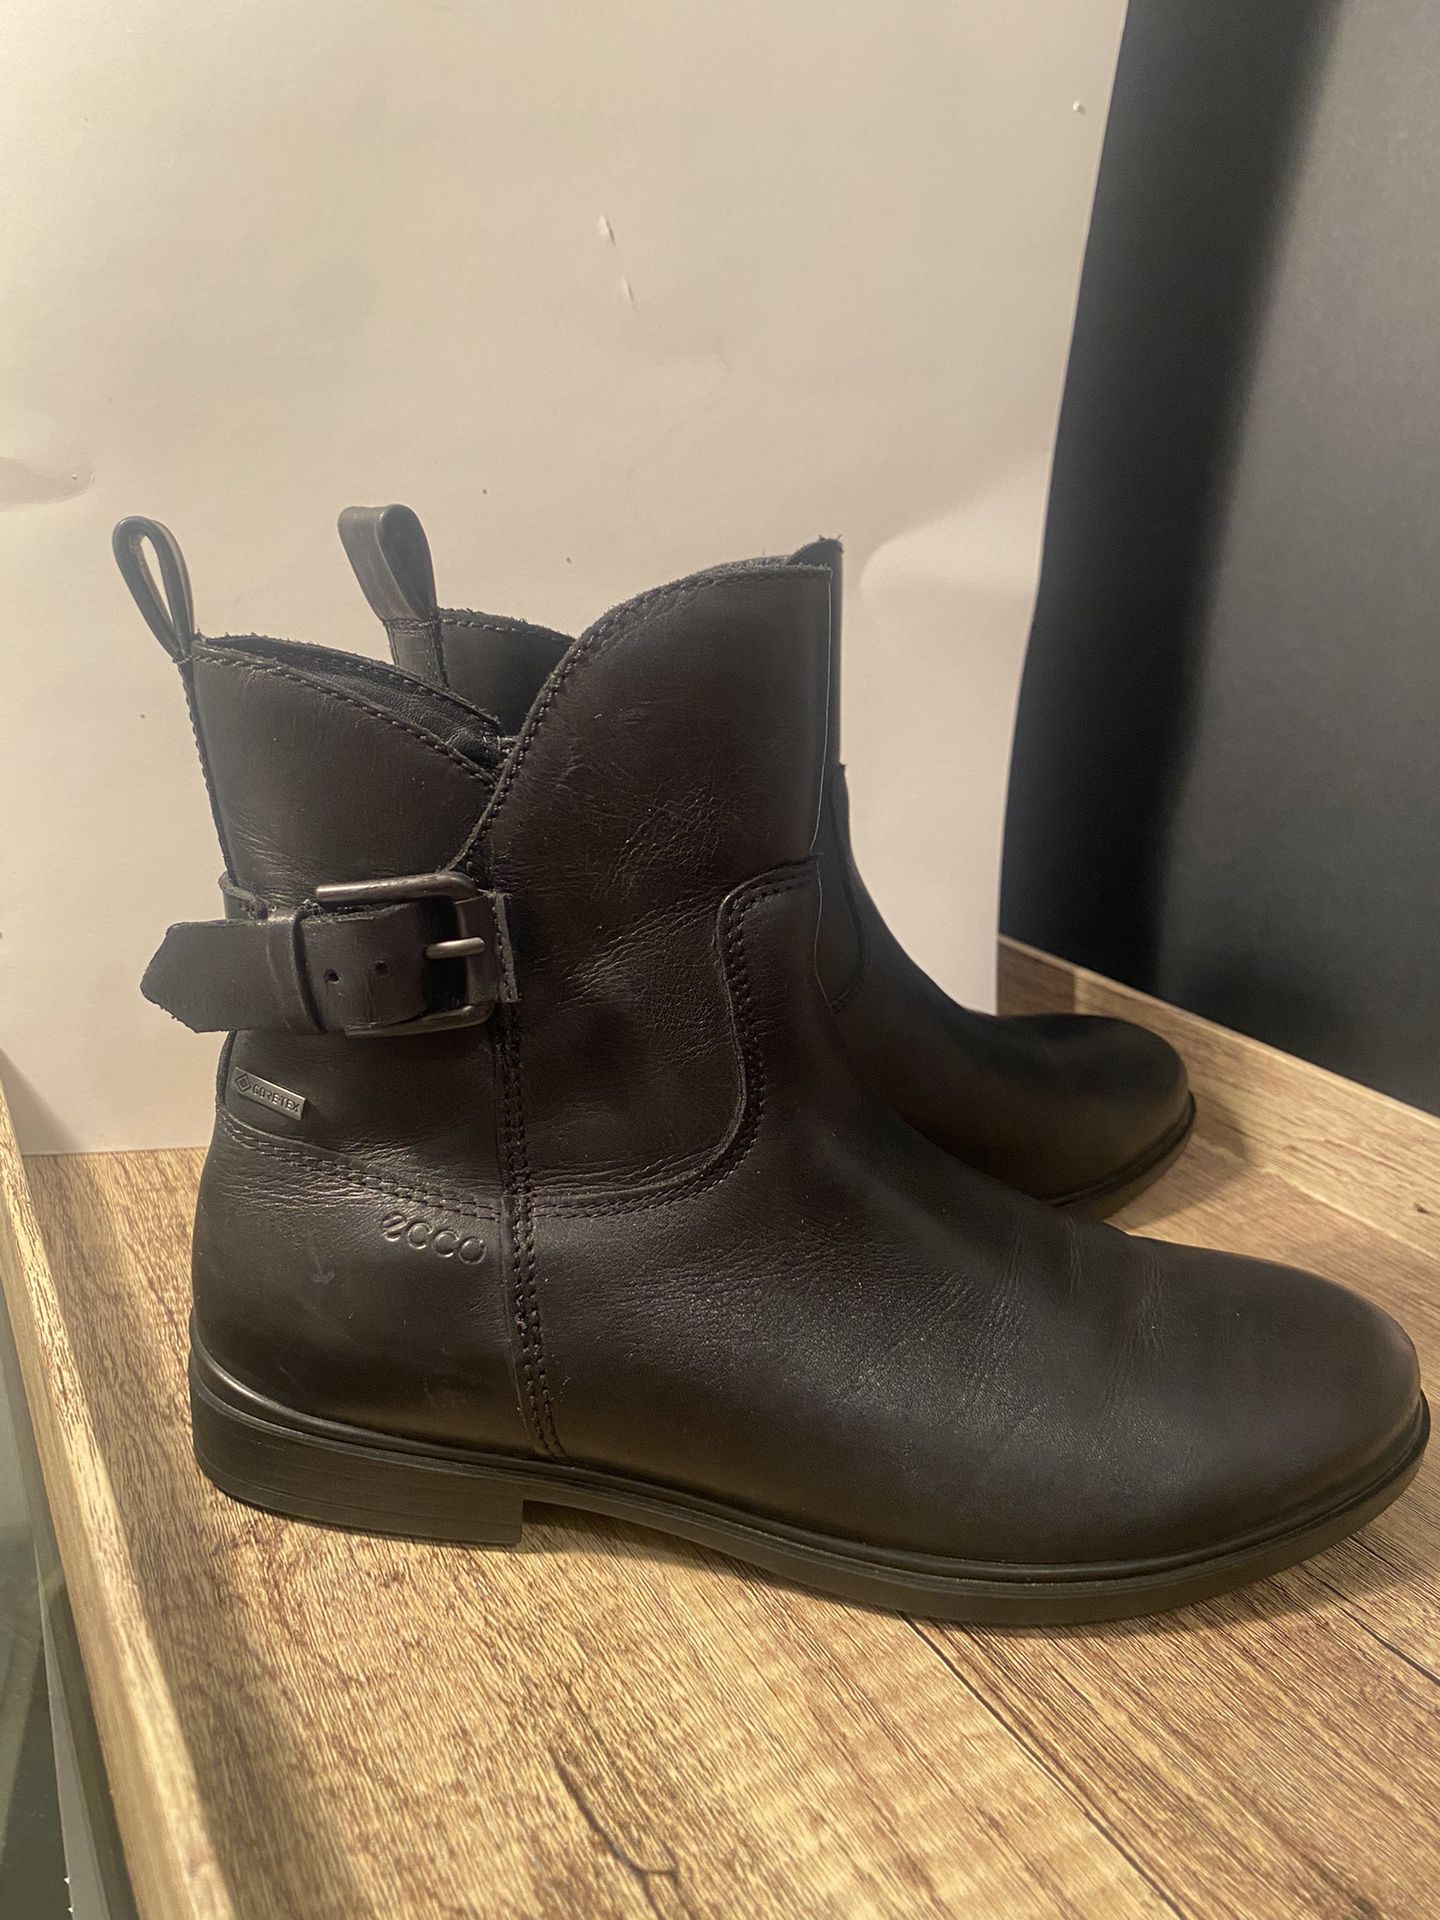 Touch 15 Gore-Tex Waterproof Ankle Boot for Sale in El TX OfferUp